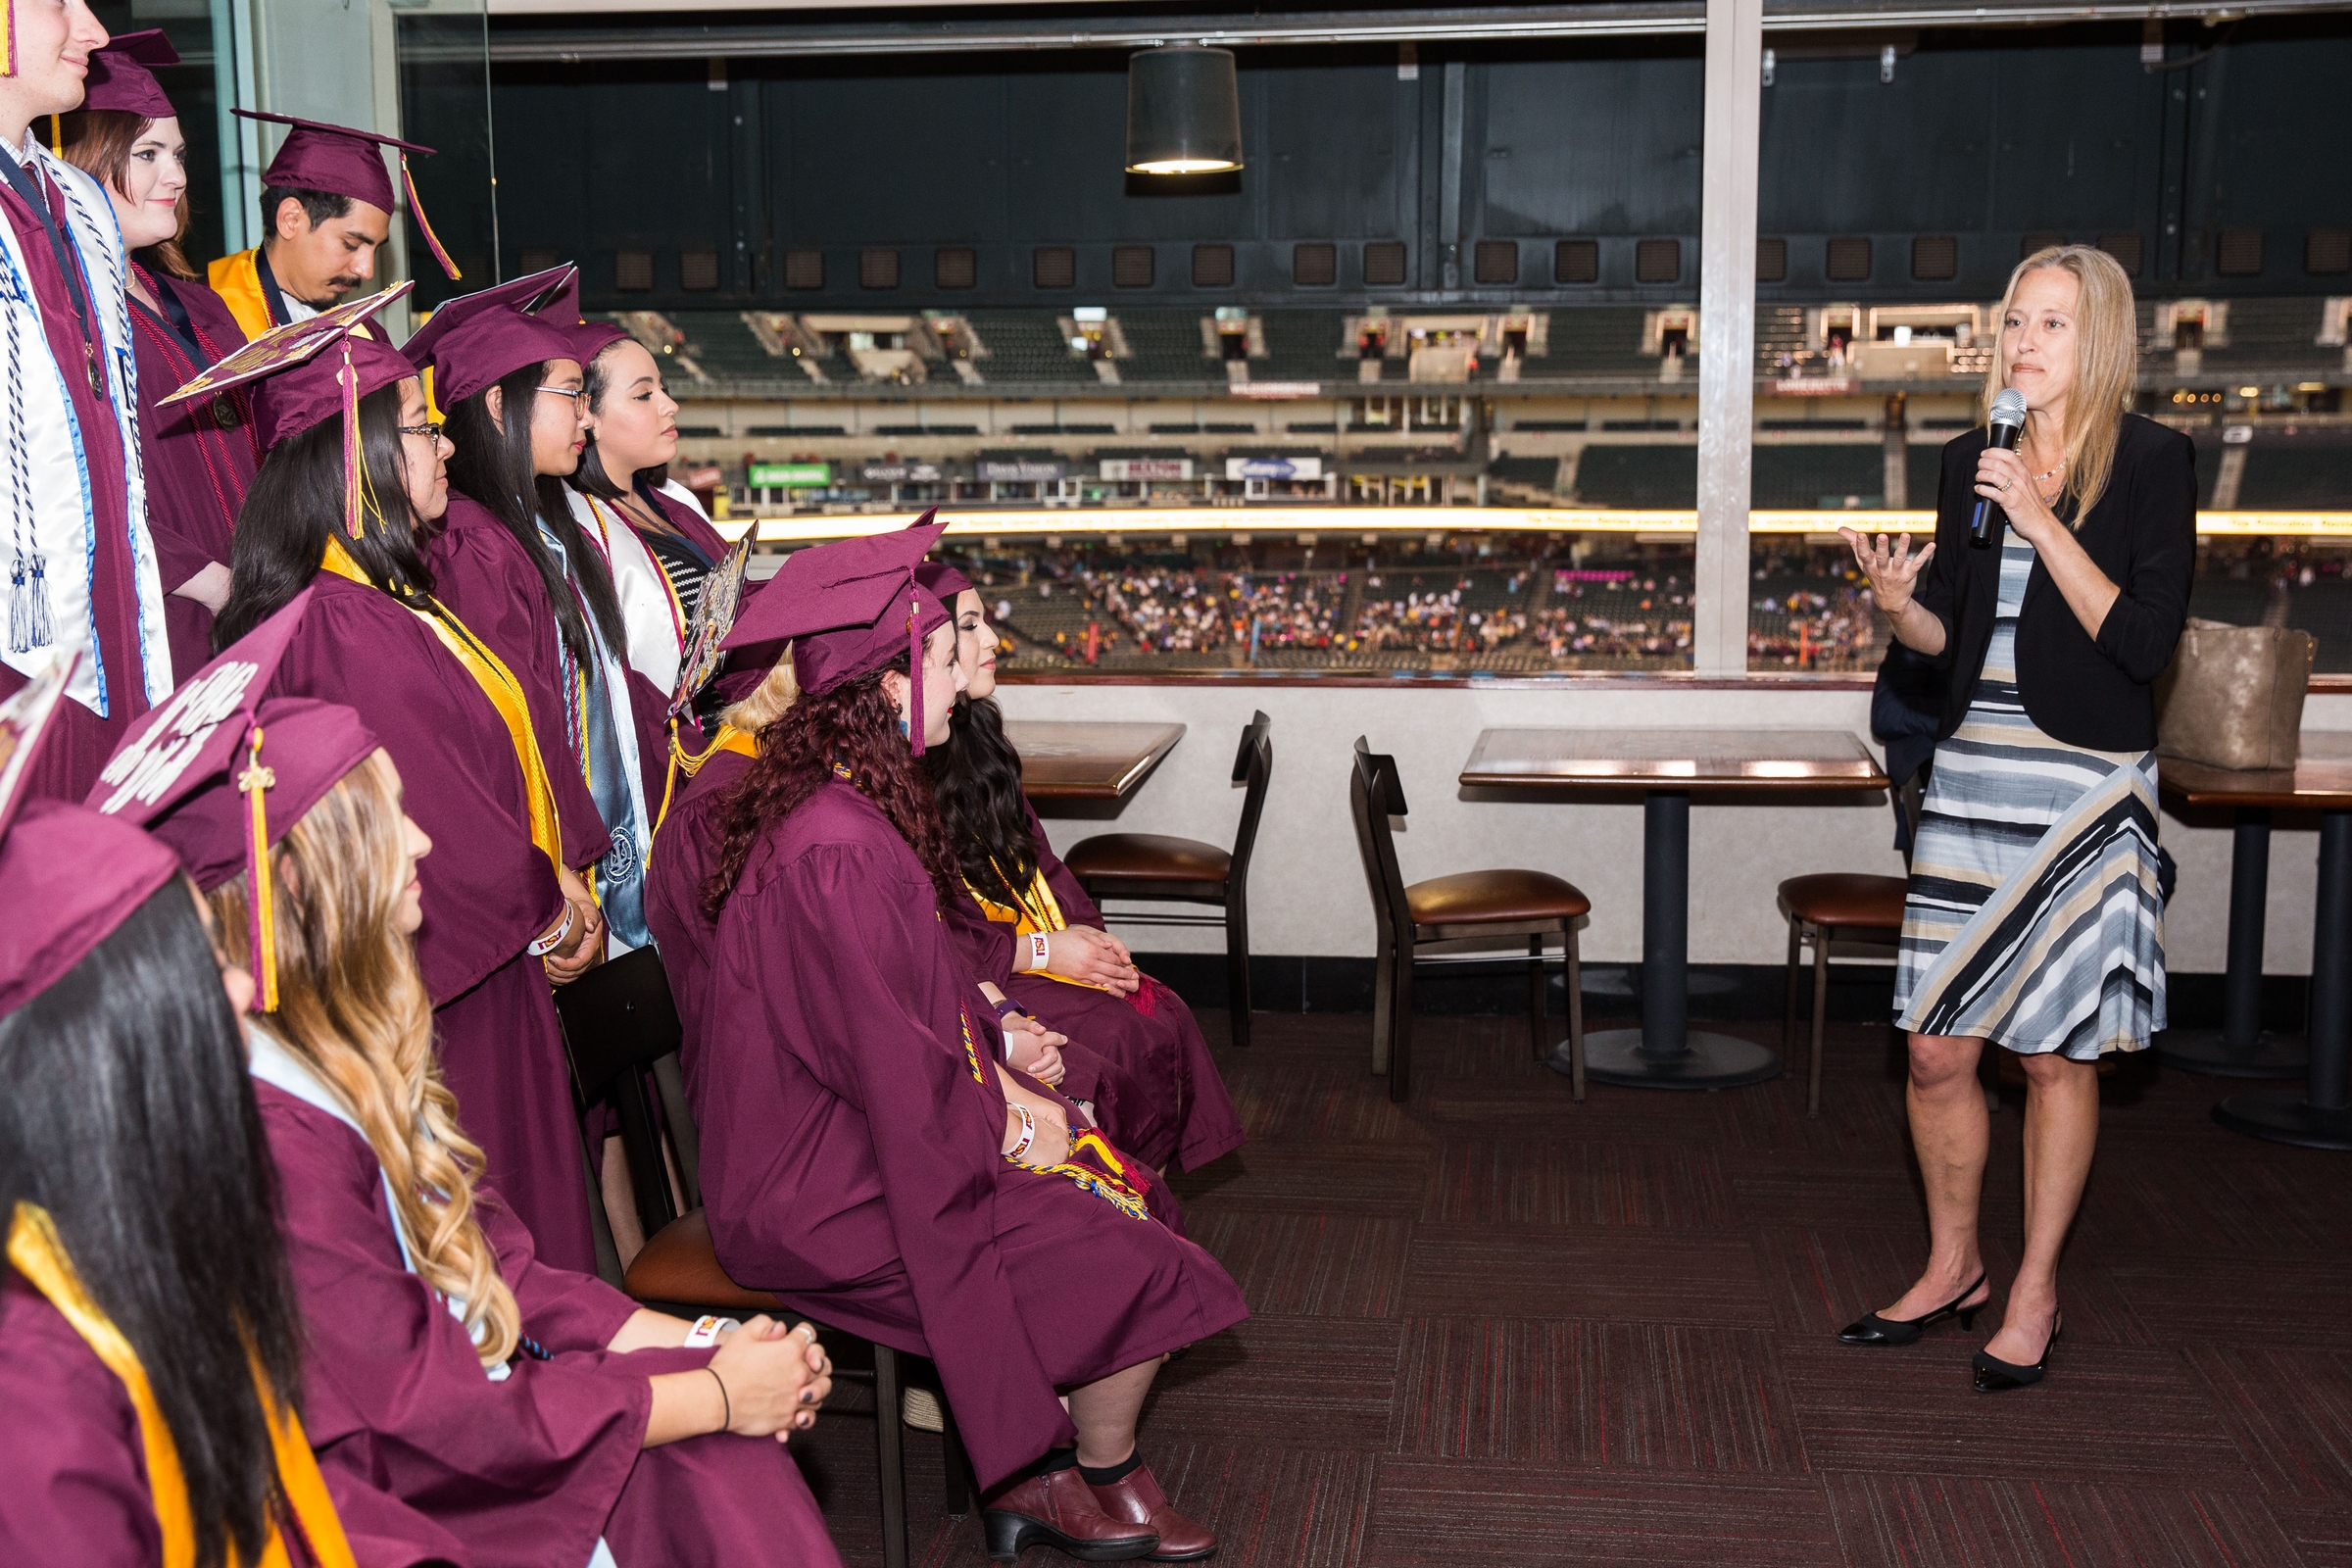 A photograph of Wendy Kopp, founder of Teach for America, speaking at a reception for ASU's TFA graduates